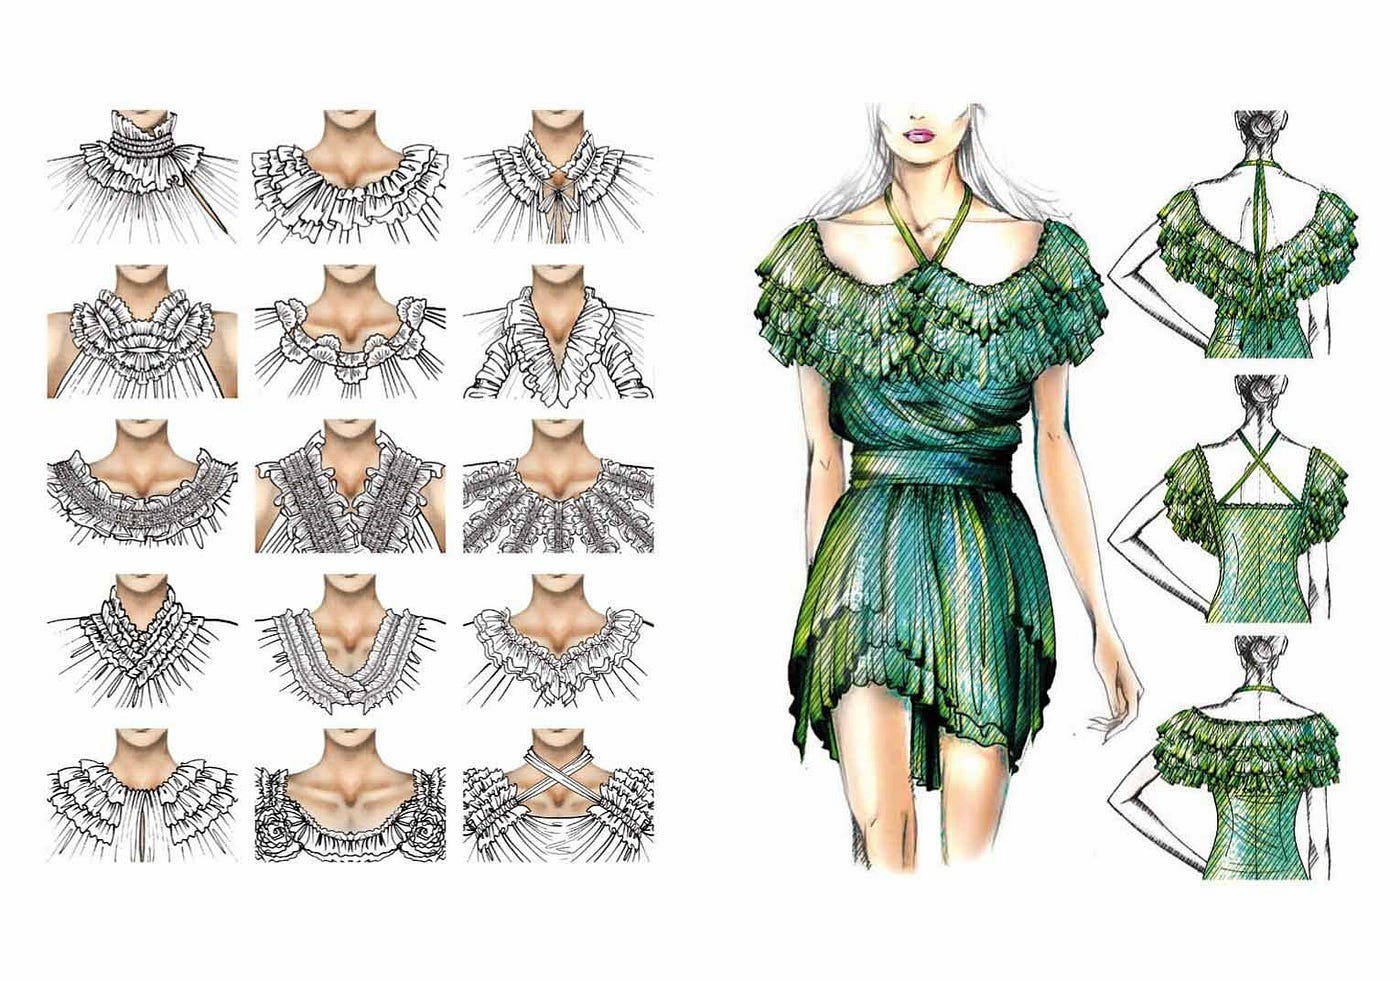 5 Things You Need to Follow to Make a Good Fashion Illustration